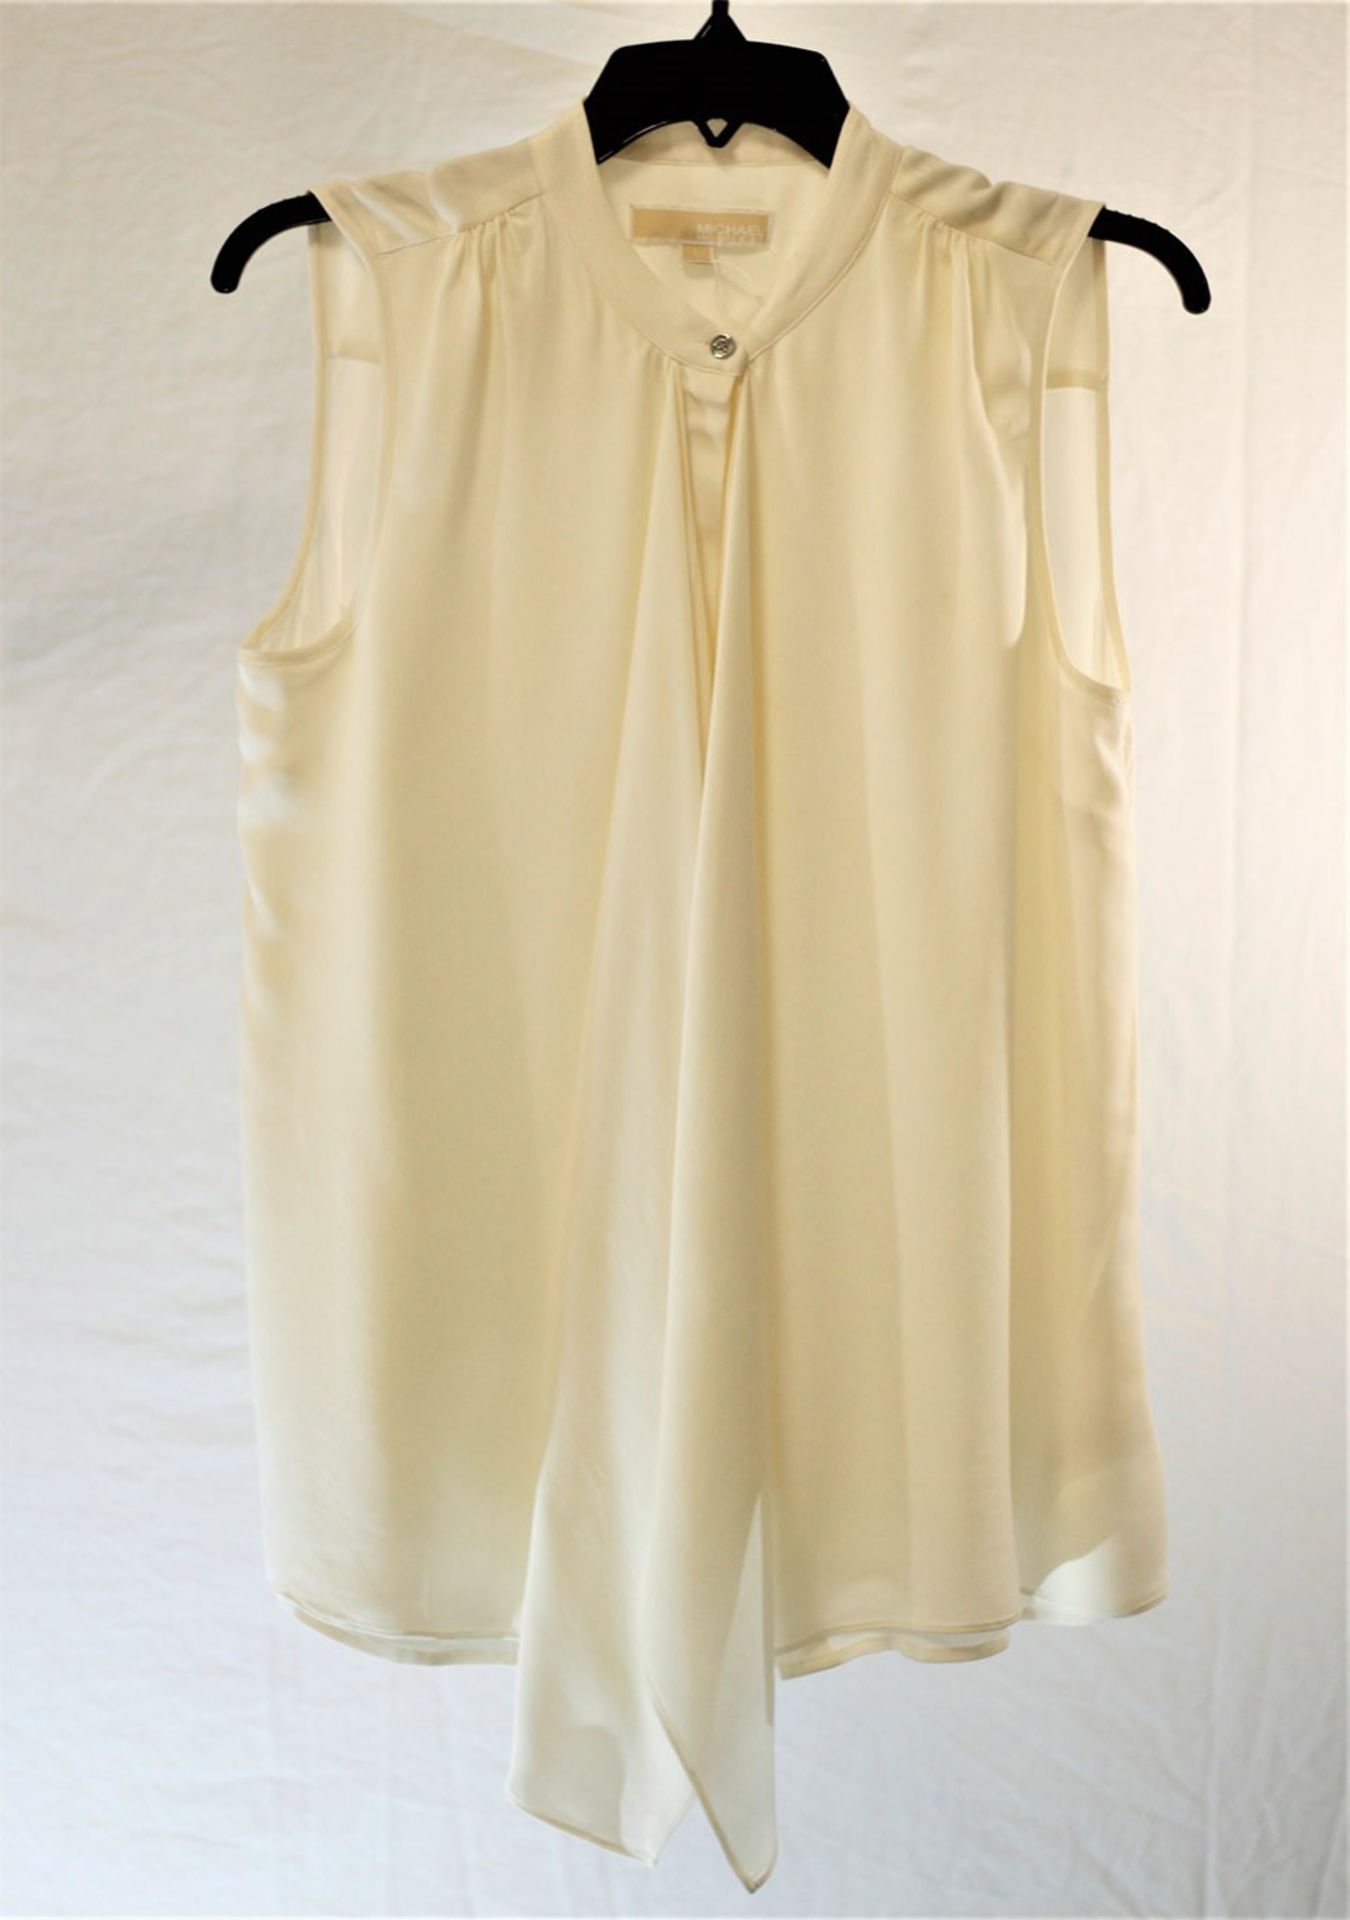 1 x Michael Kors Cream Blouse - Size: L - Material: 100% Silk - From a High End Clothing Boutique In